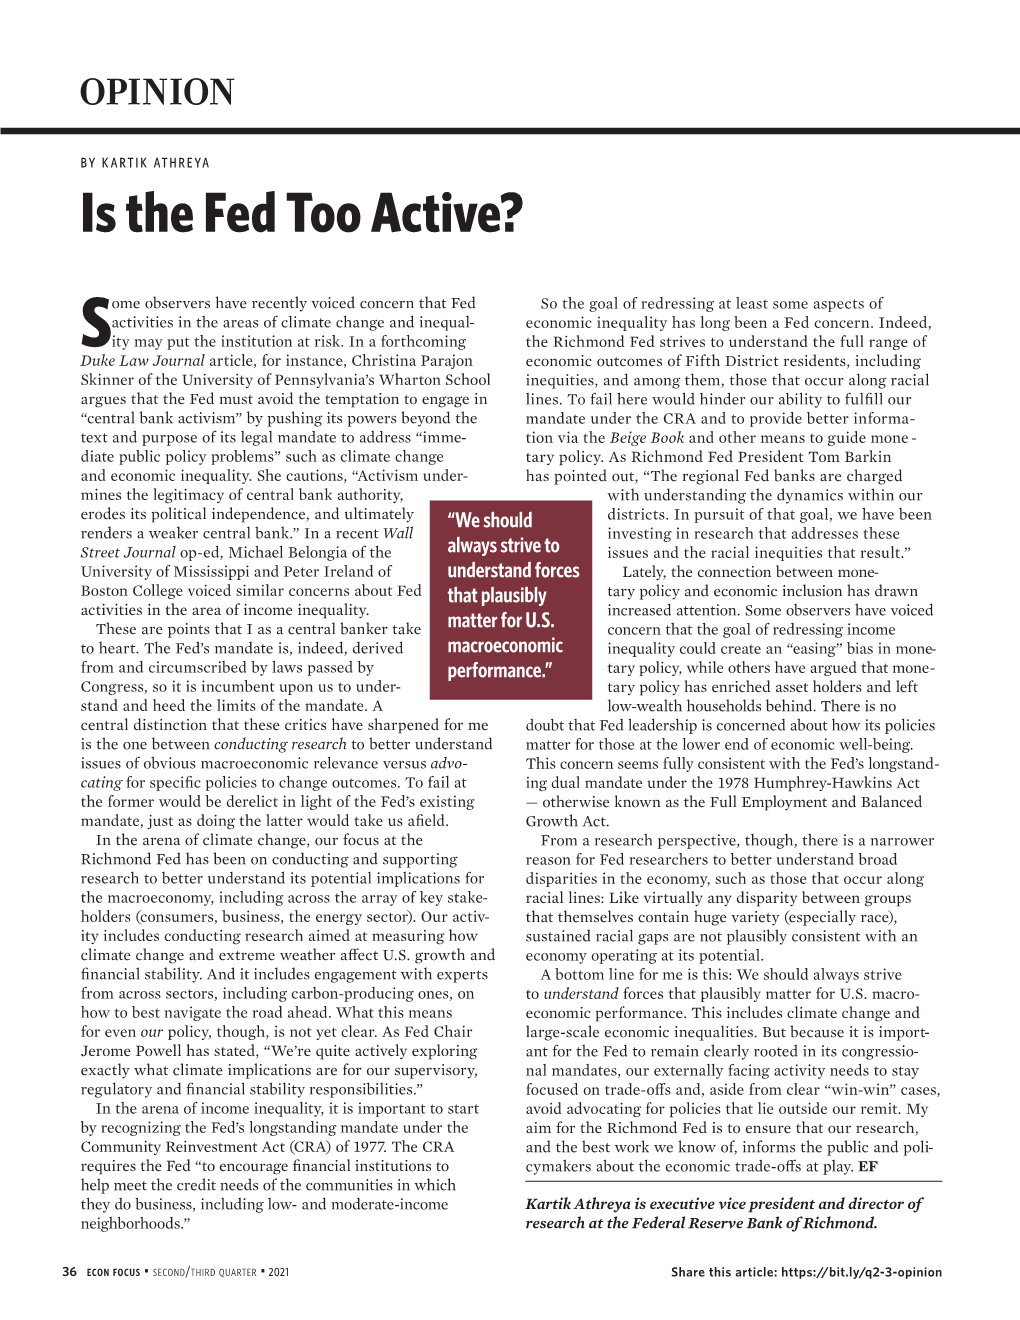 Is the Fed Too Active?